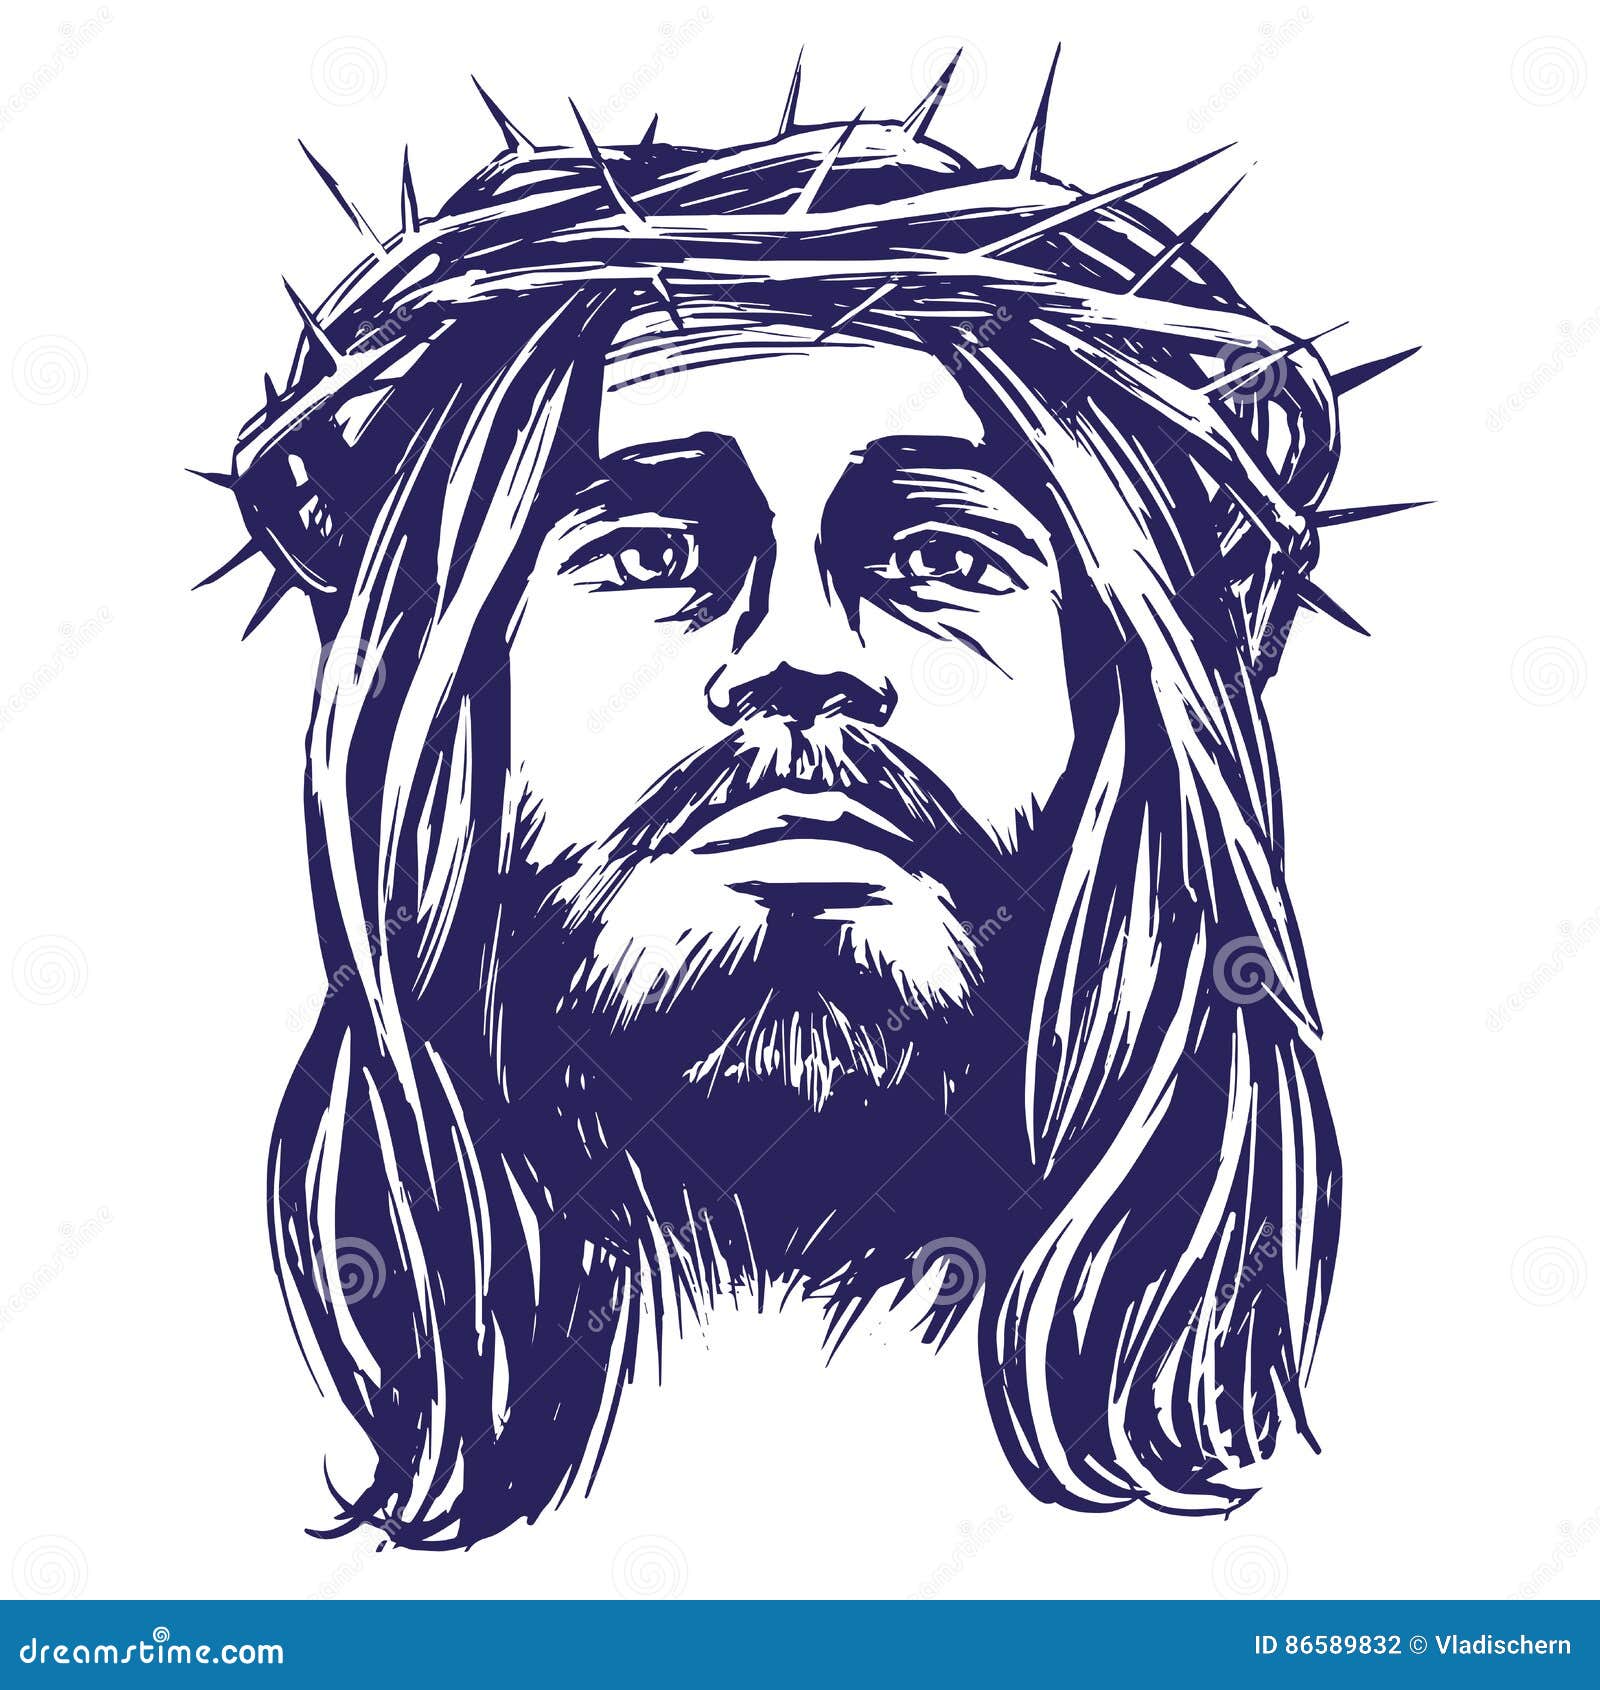 Jesus Christ, the Son of God in a Crown of Thorns on His Head, a Symbol ...